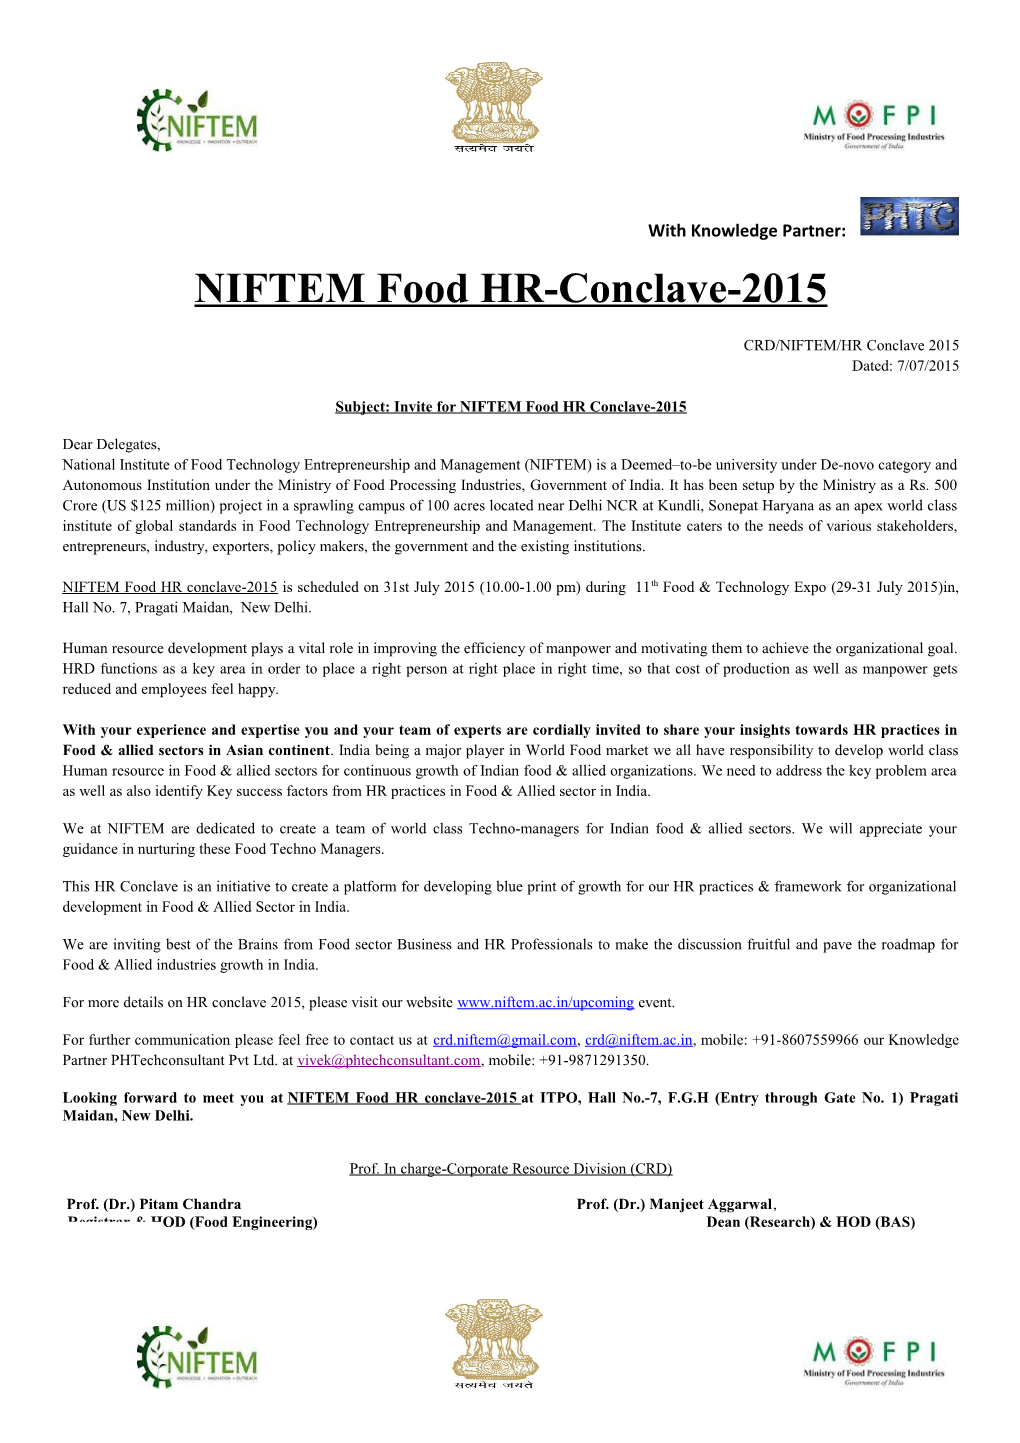 Subject: Invite for NIFTEM Food HR Conclave-2015